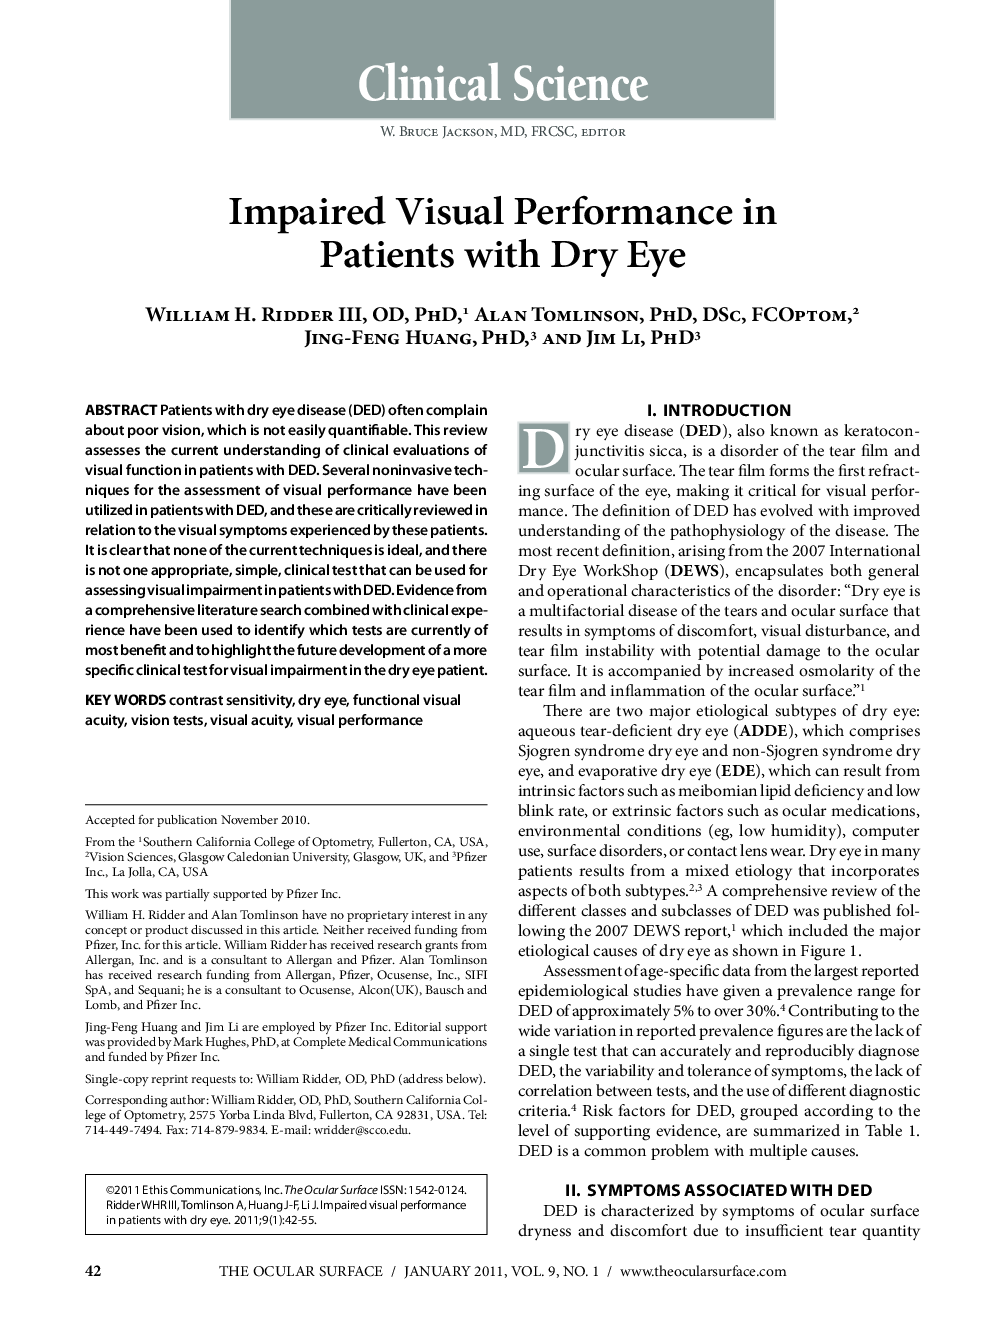 Impaired Visual Performance in Patients with Dry Eye 